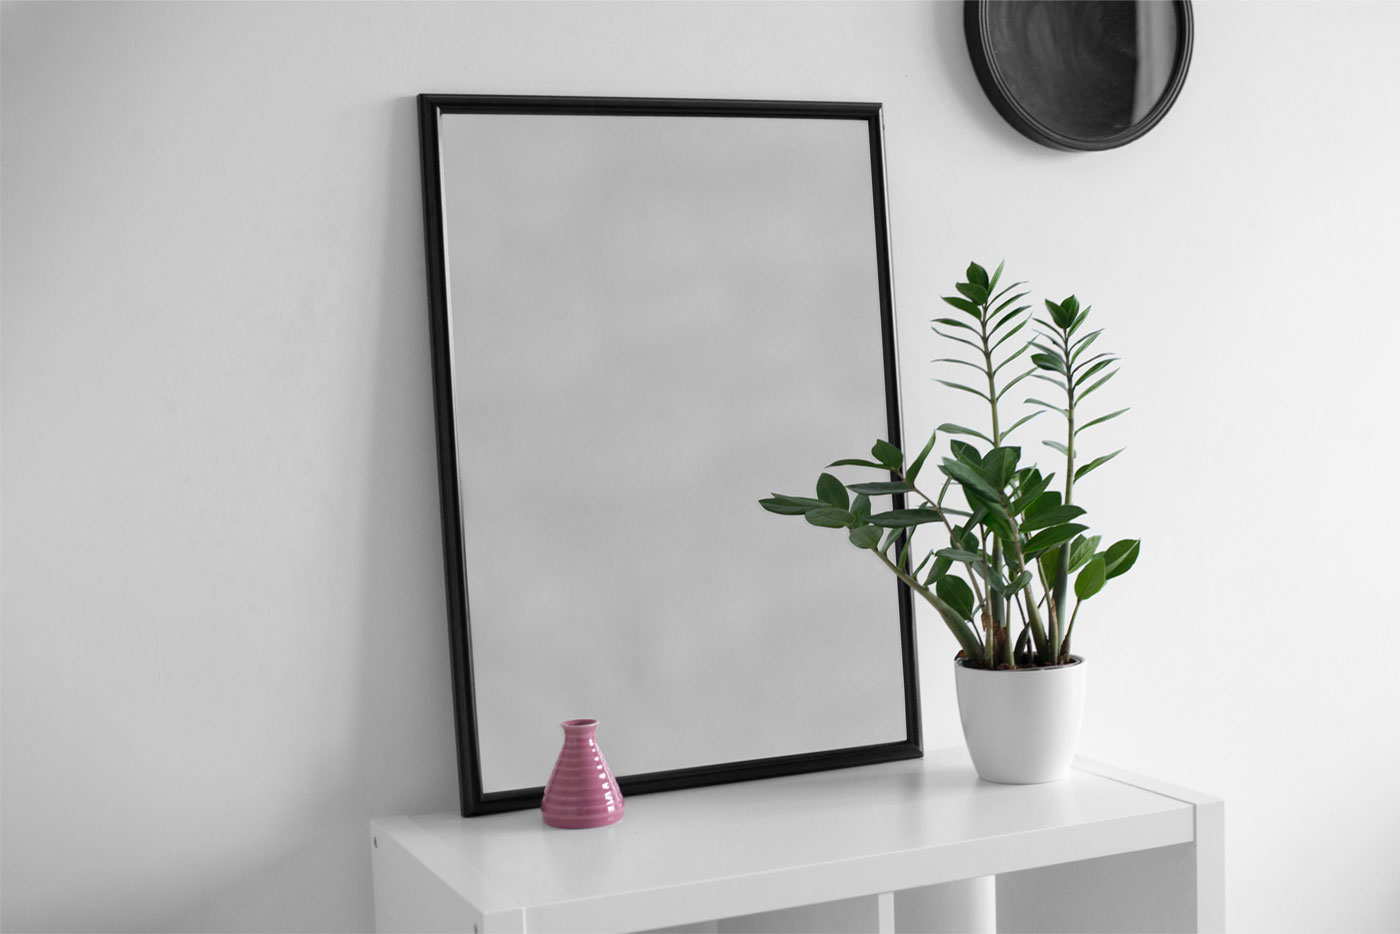 Realistic Poster on White Desk Mockup PSD FREE PSD